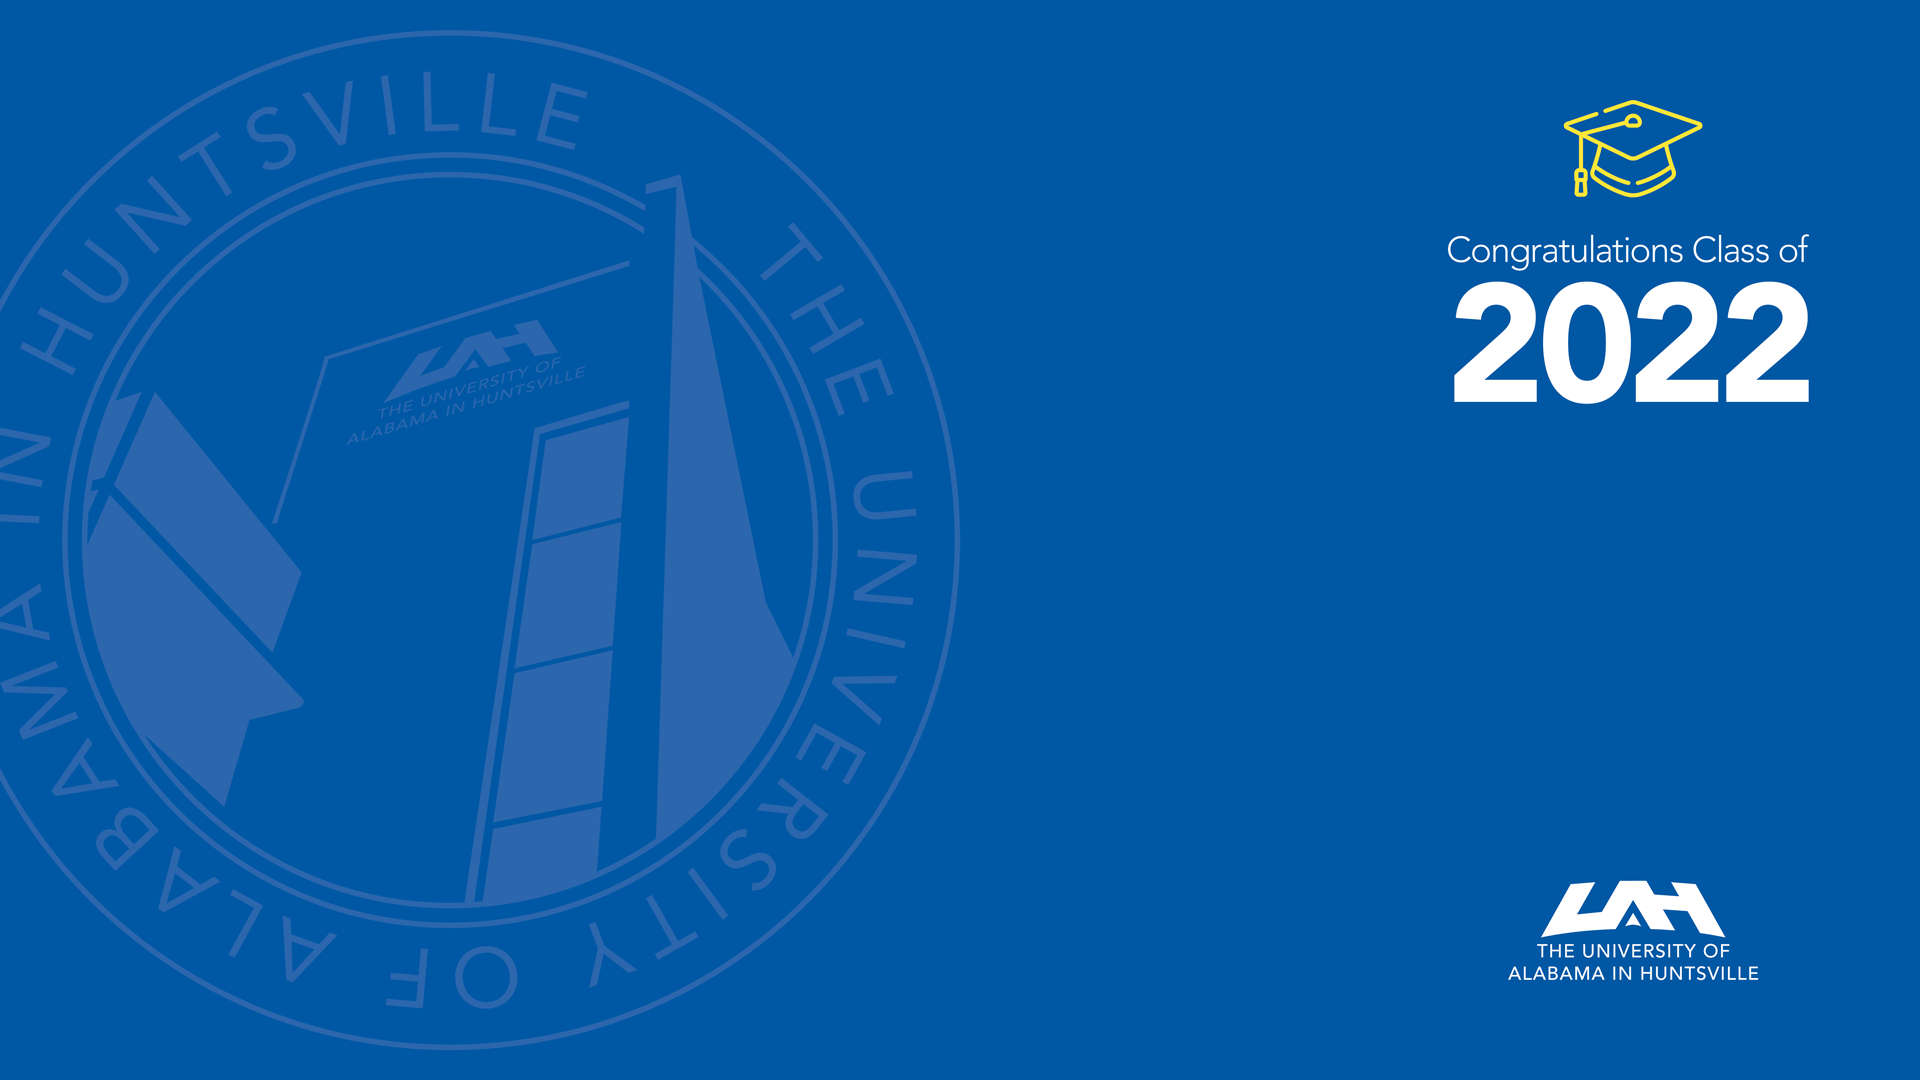 uah zoom background with university seal text says congratulations class of 2021 